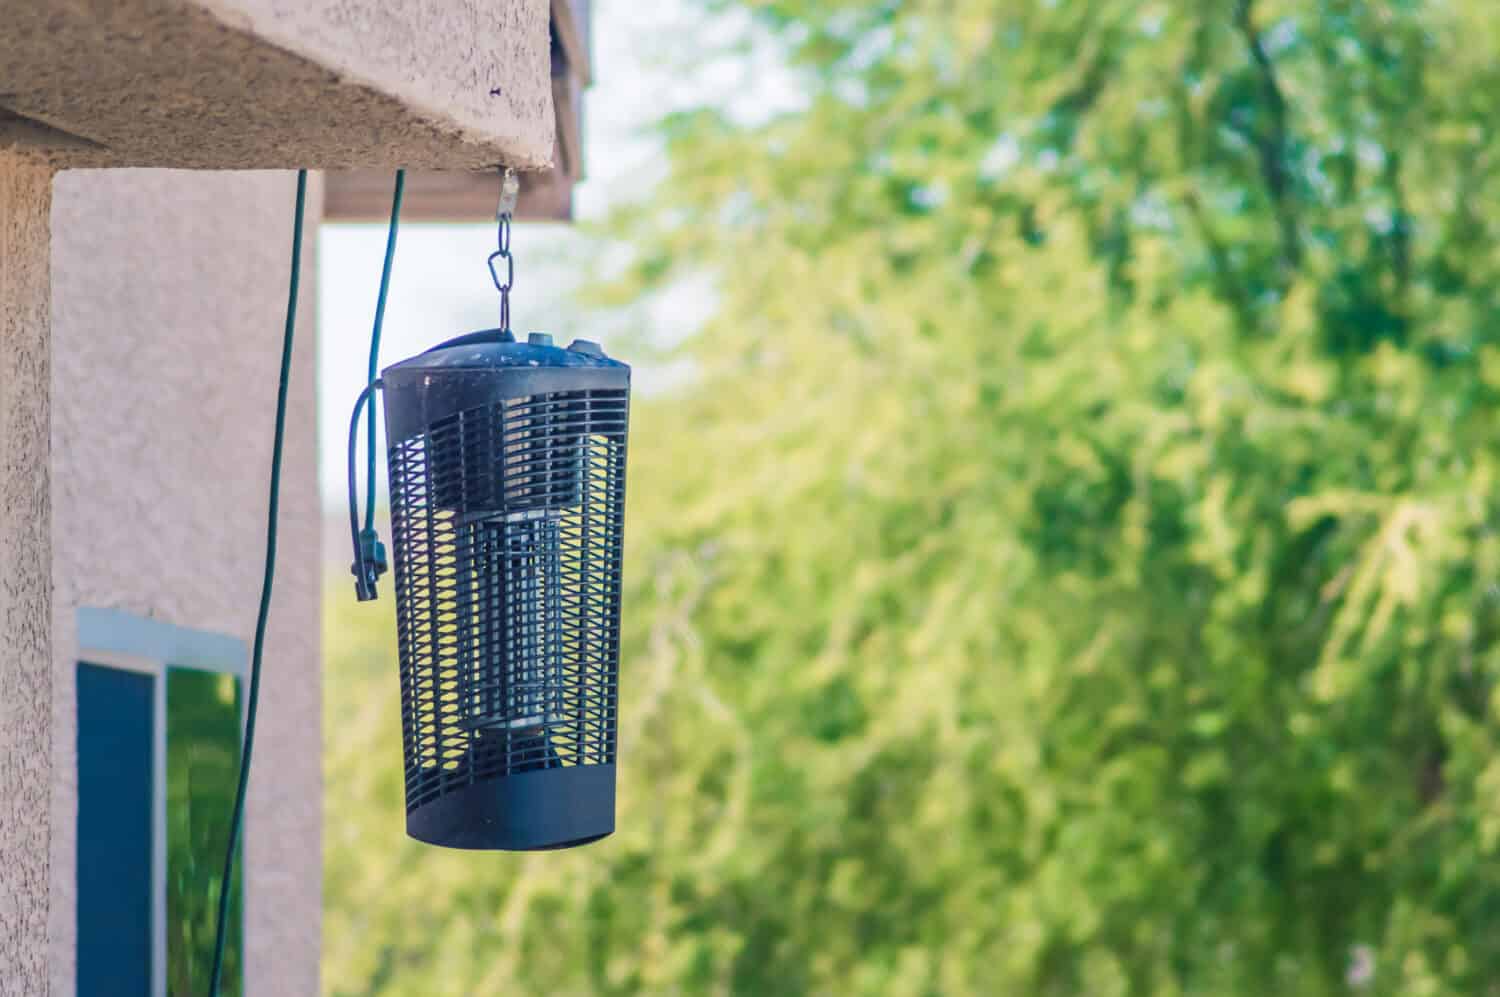 Bug zappers are an effective way to reduce fly populations in your yard